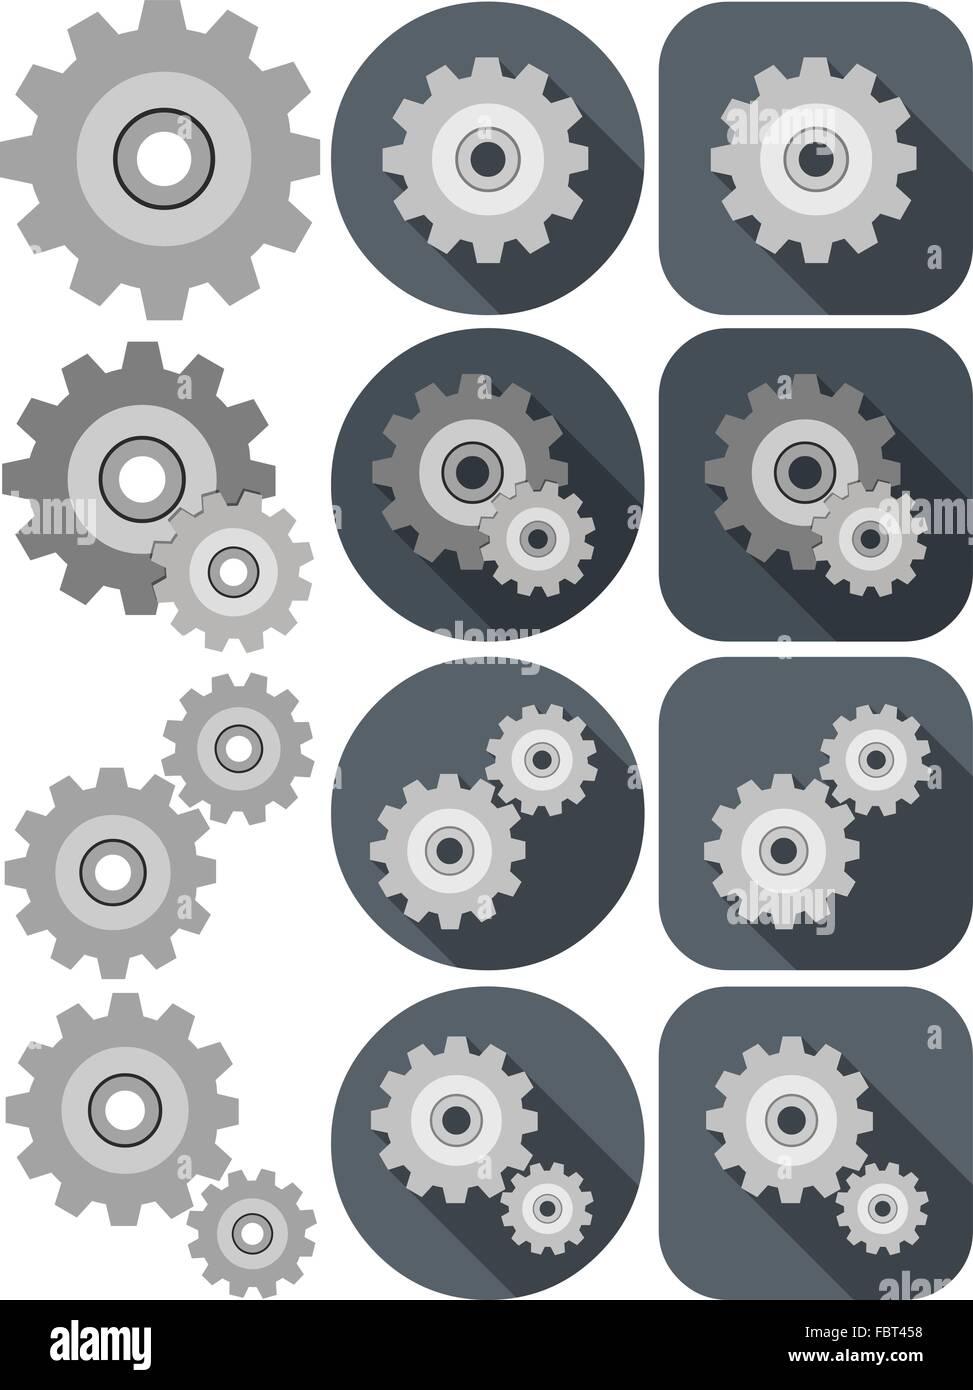 A vector illustration pack of settings icon made with wheels. Stock Vector